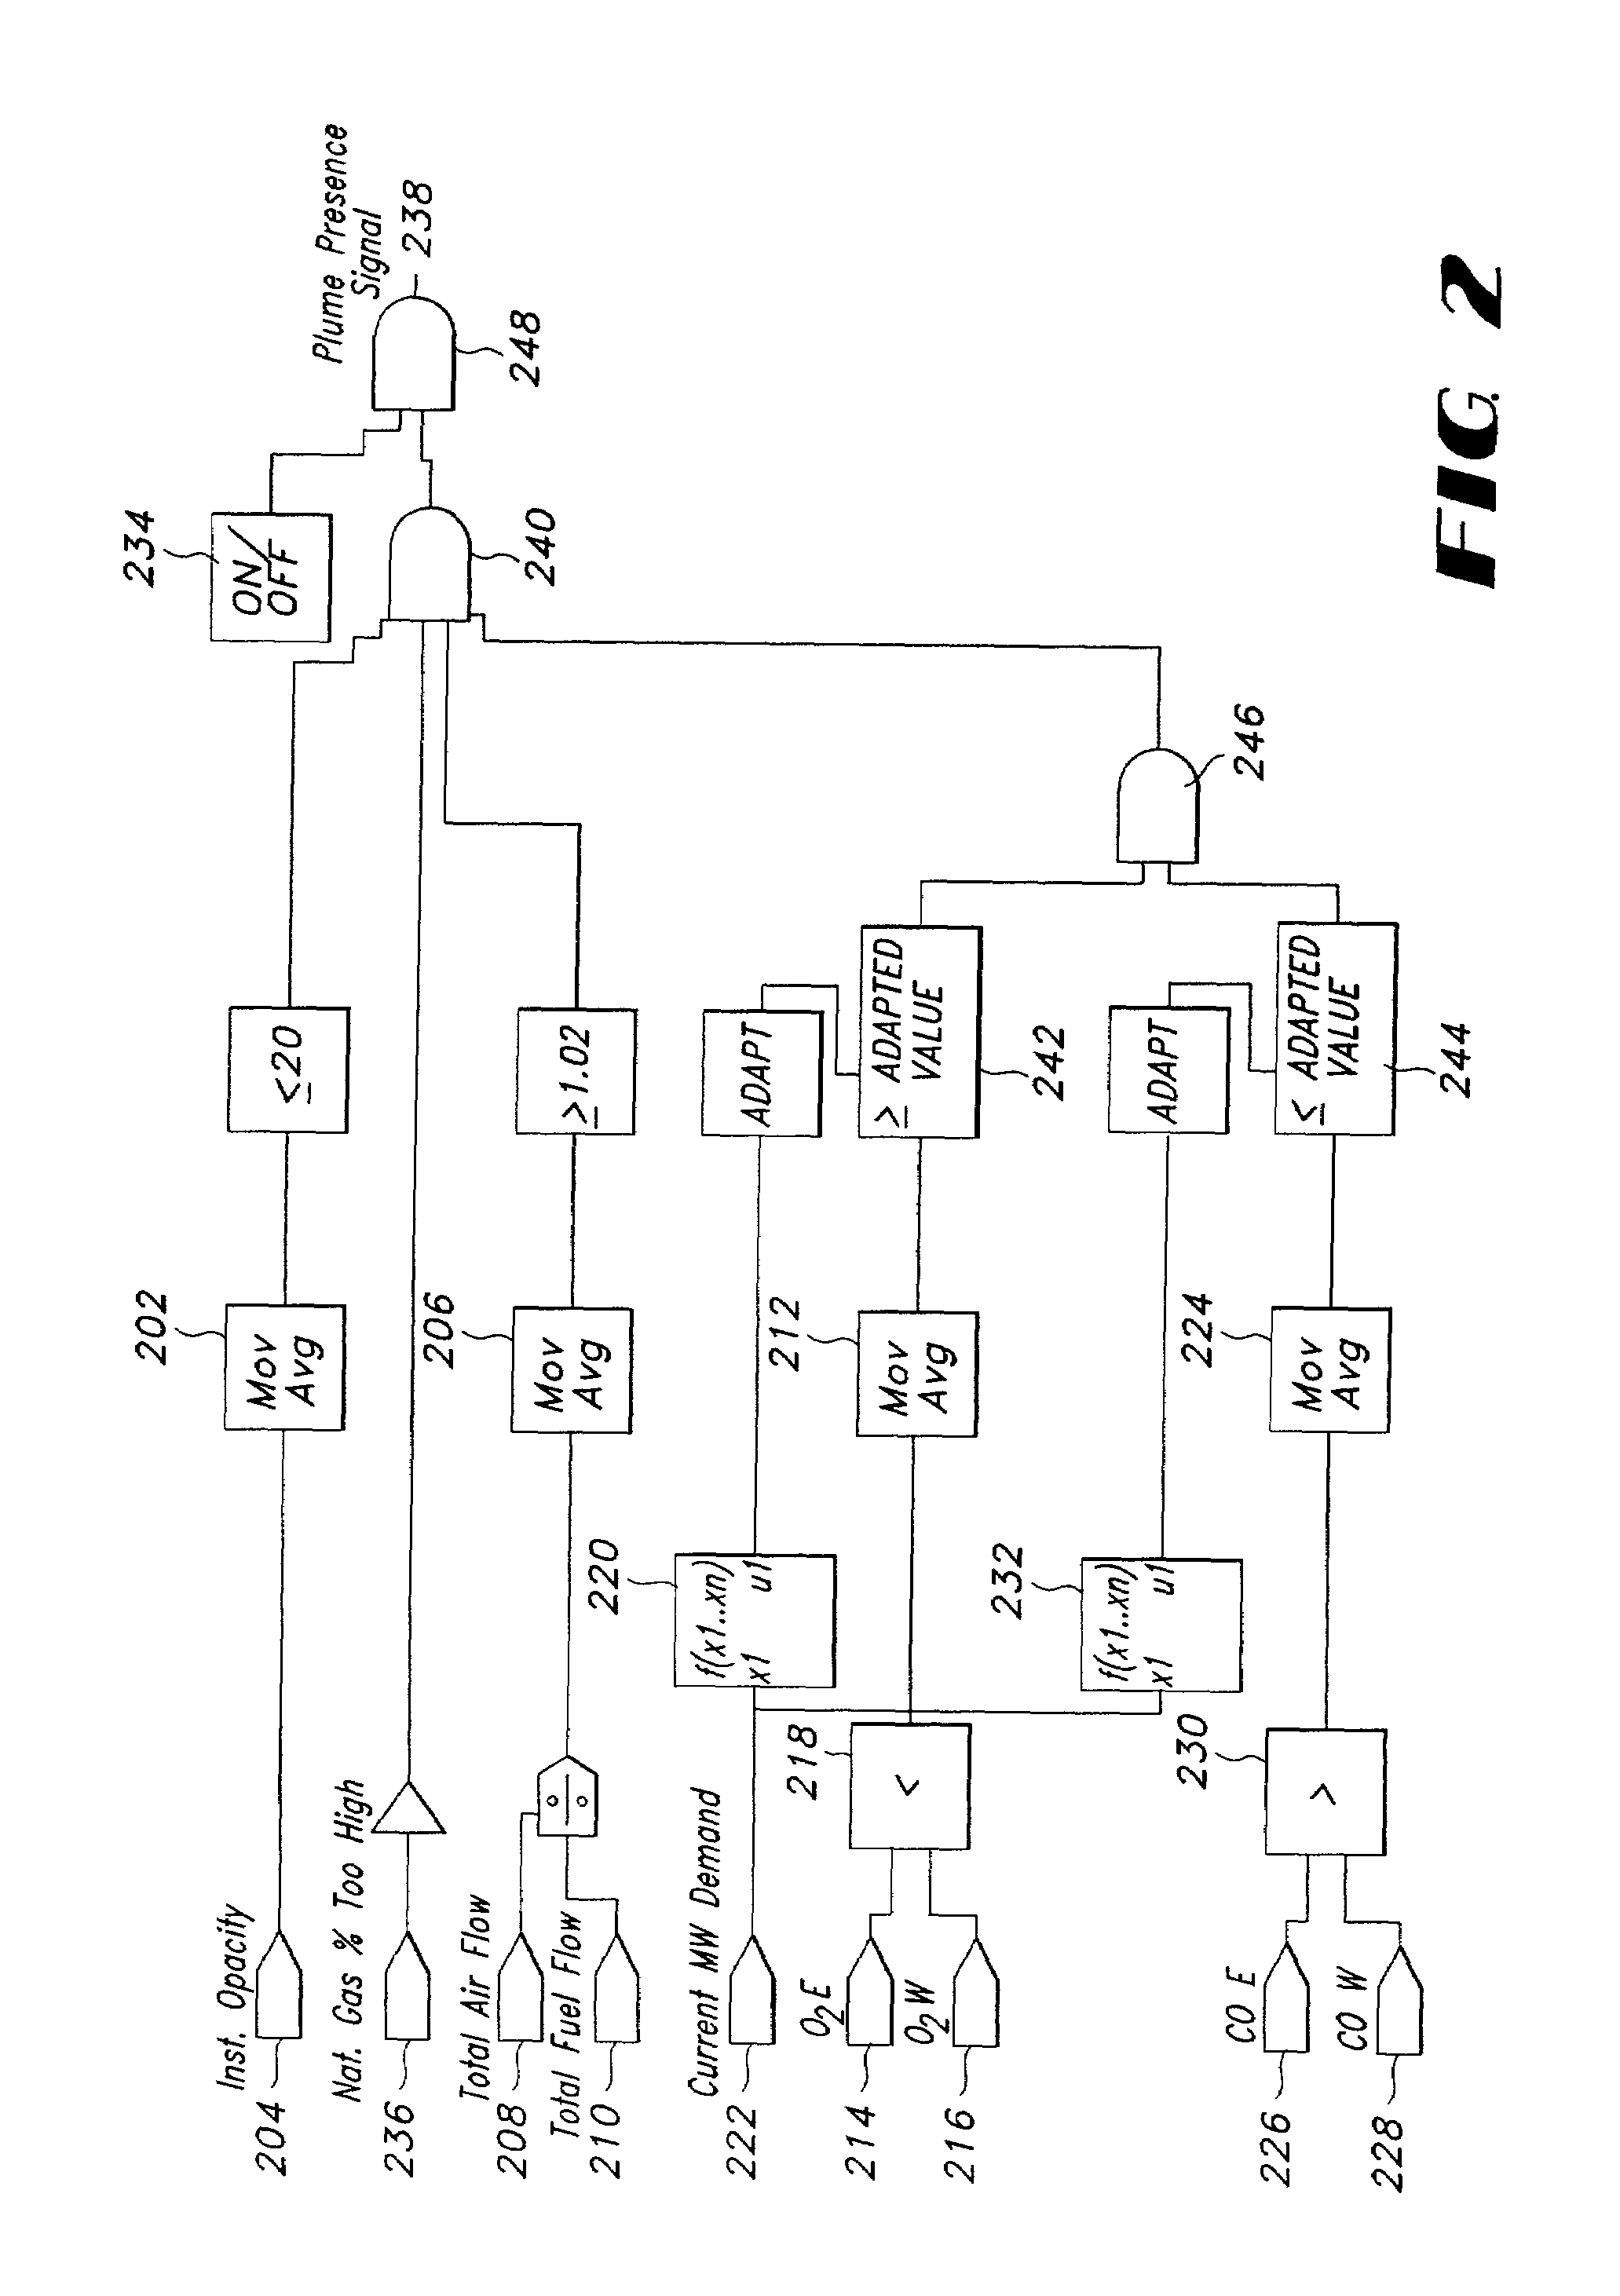 Systems and methods for determining the existence of a visible plume from the chimney of a facility burning carbon-based fuels